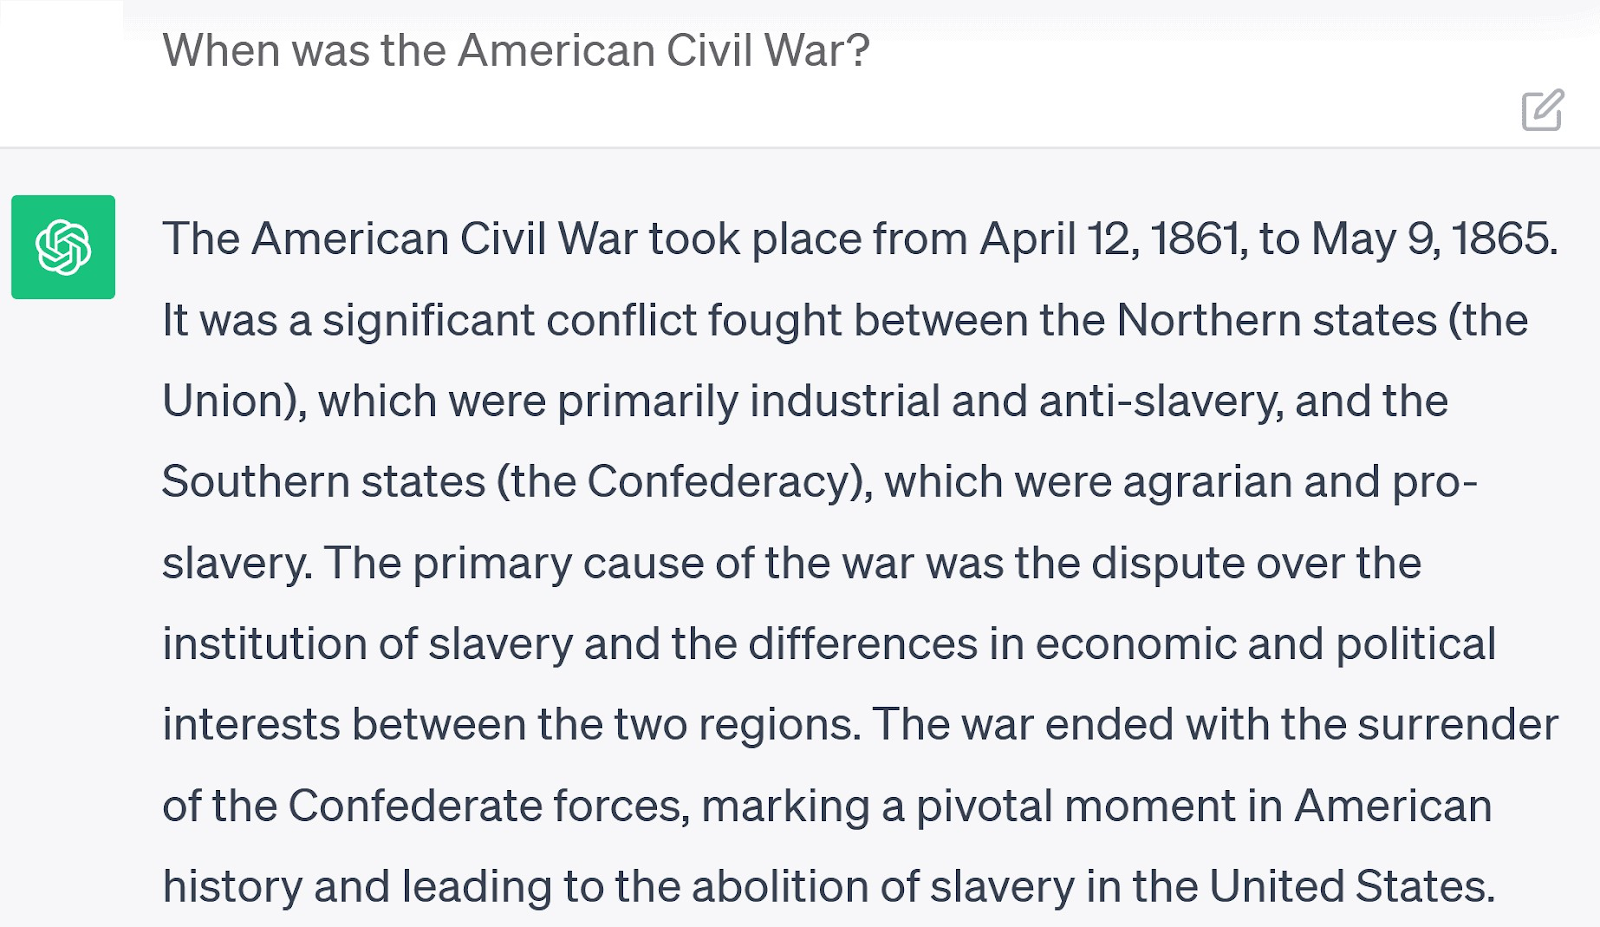 ChatGPT’s response to "When was the American Civil War?" prompt